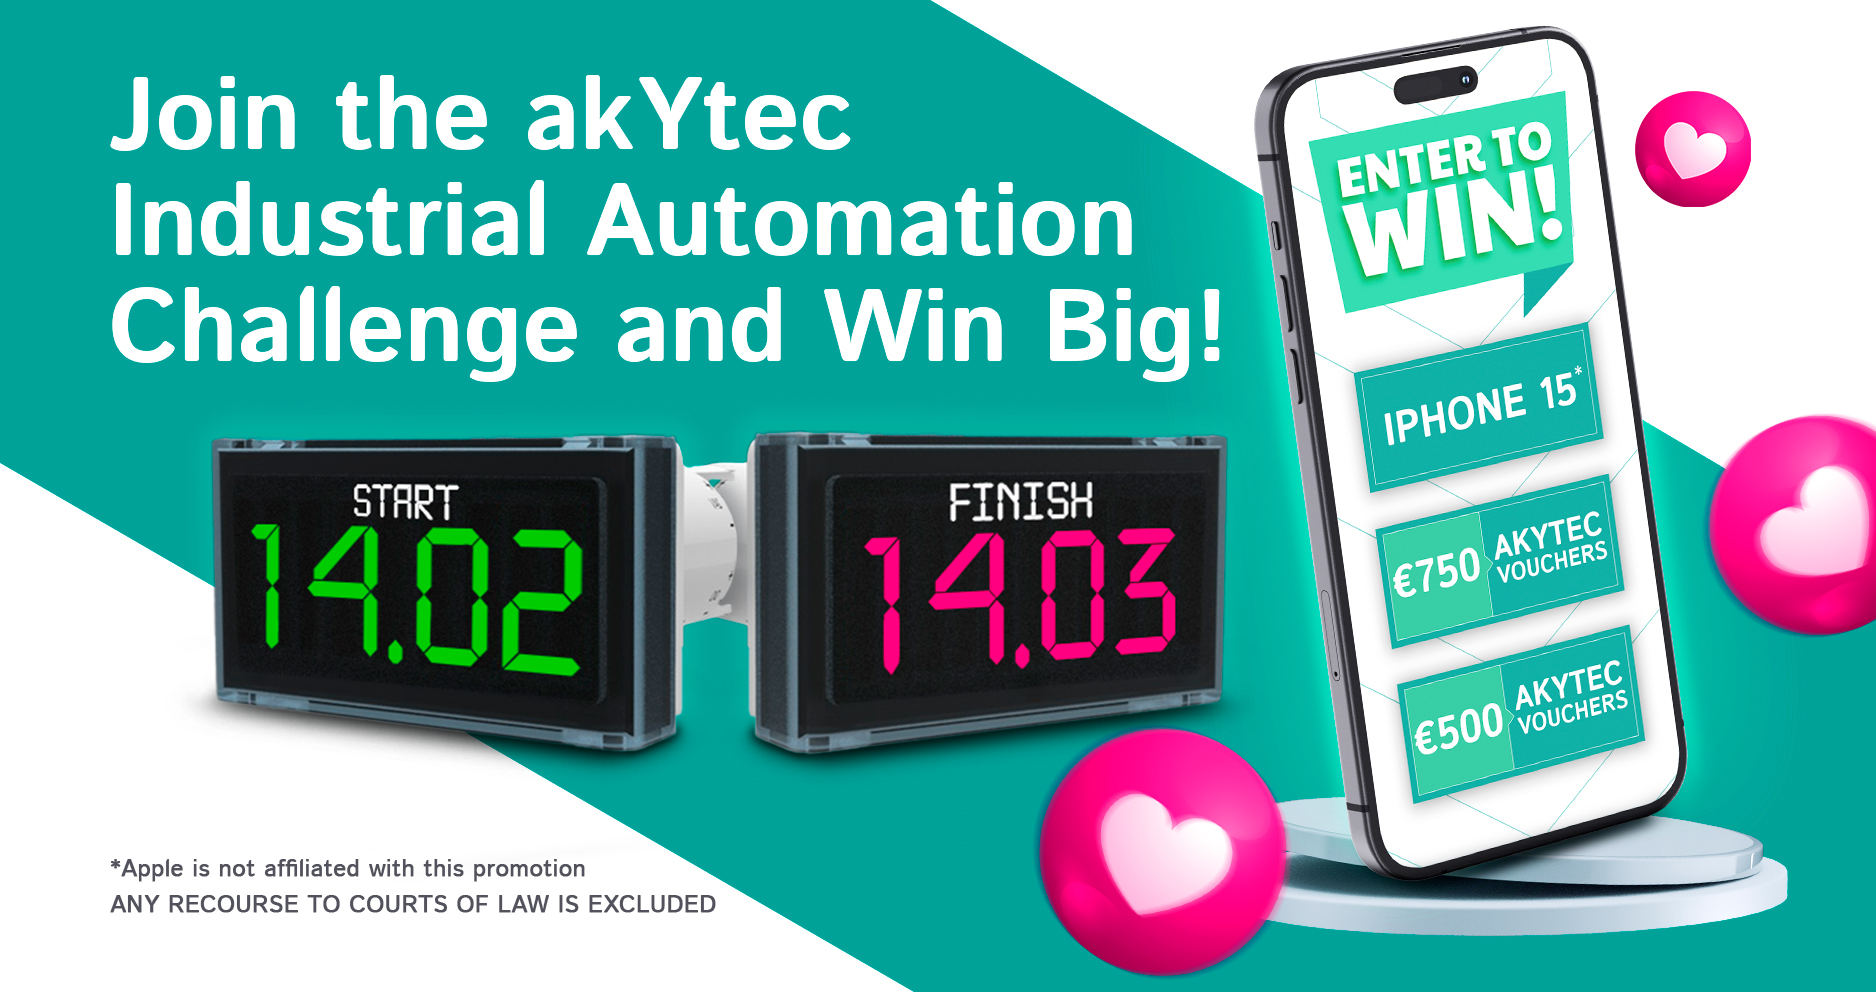 the akYtec Industrial Automation Challenge 